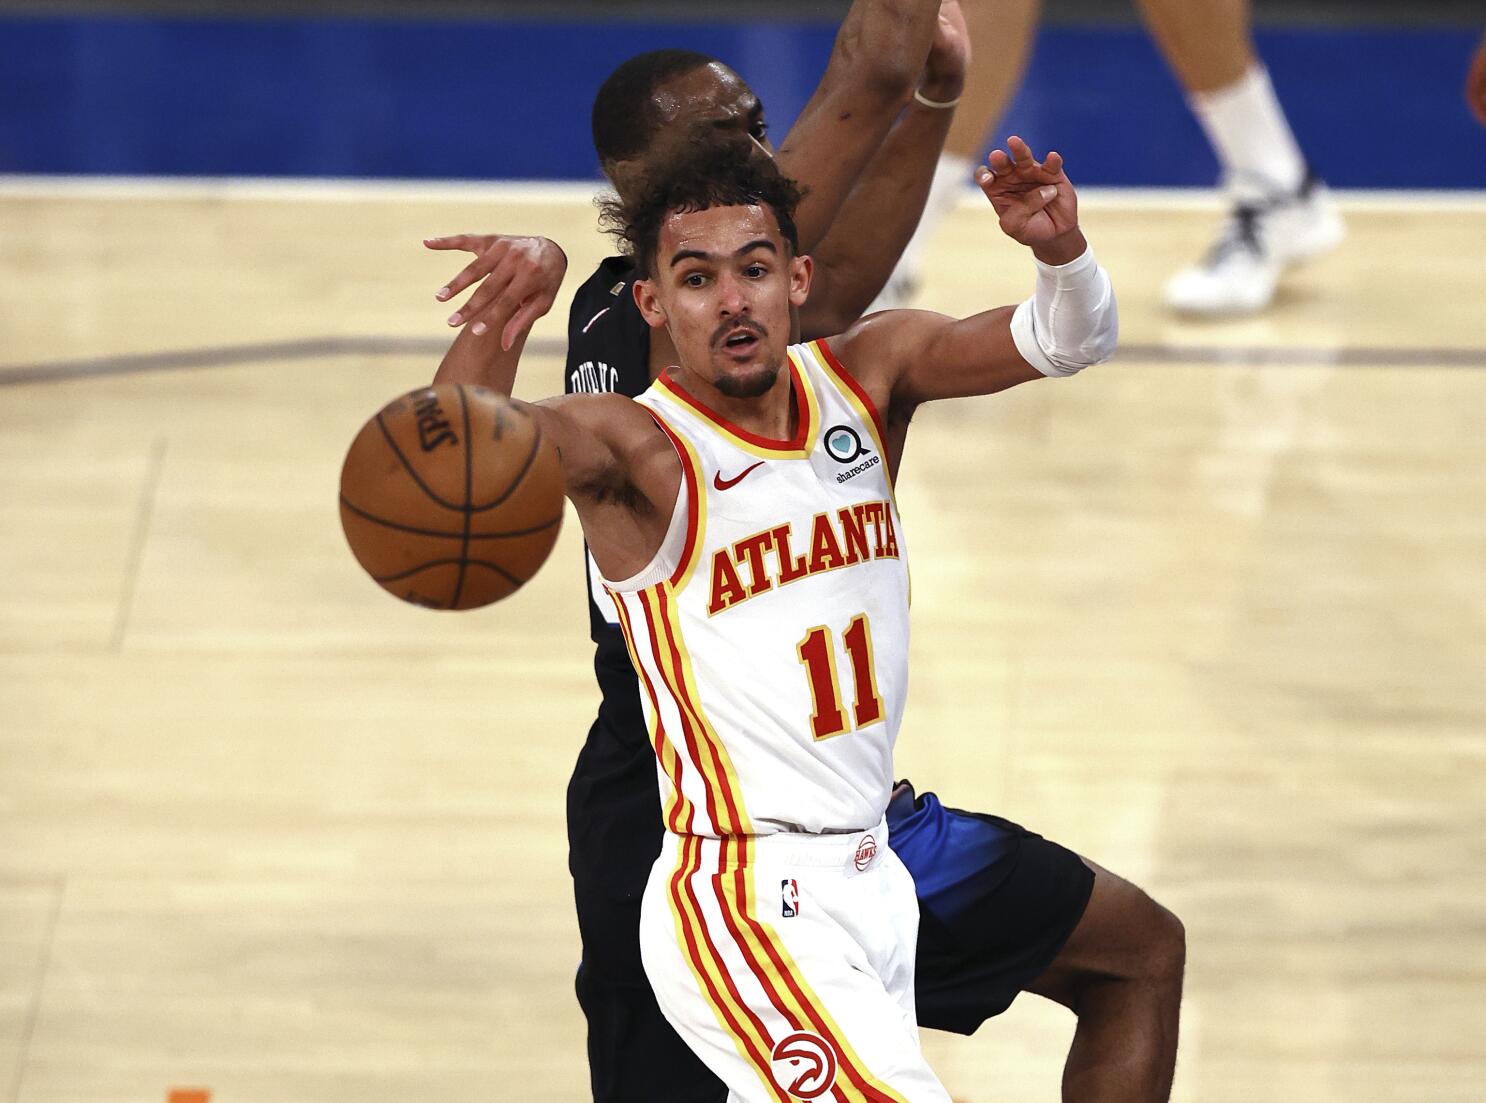 Hawks know intensity will pick up in Game 2 vs. Knicks